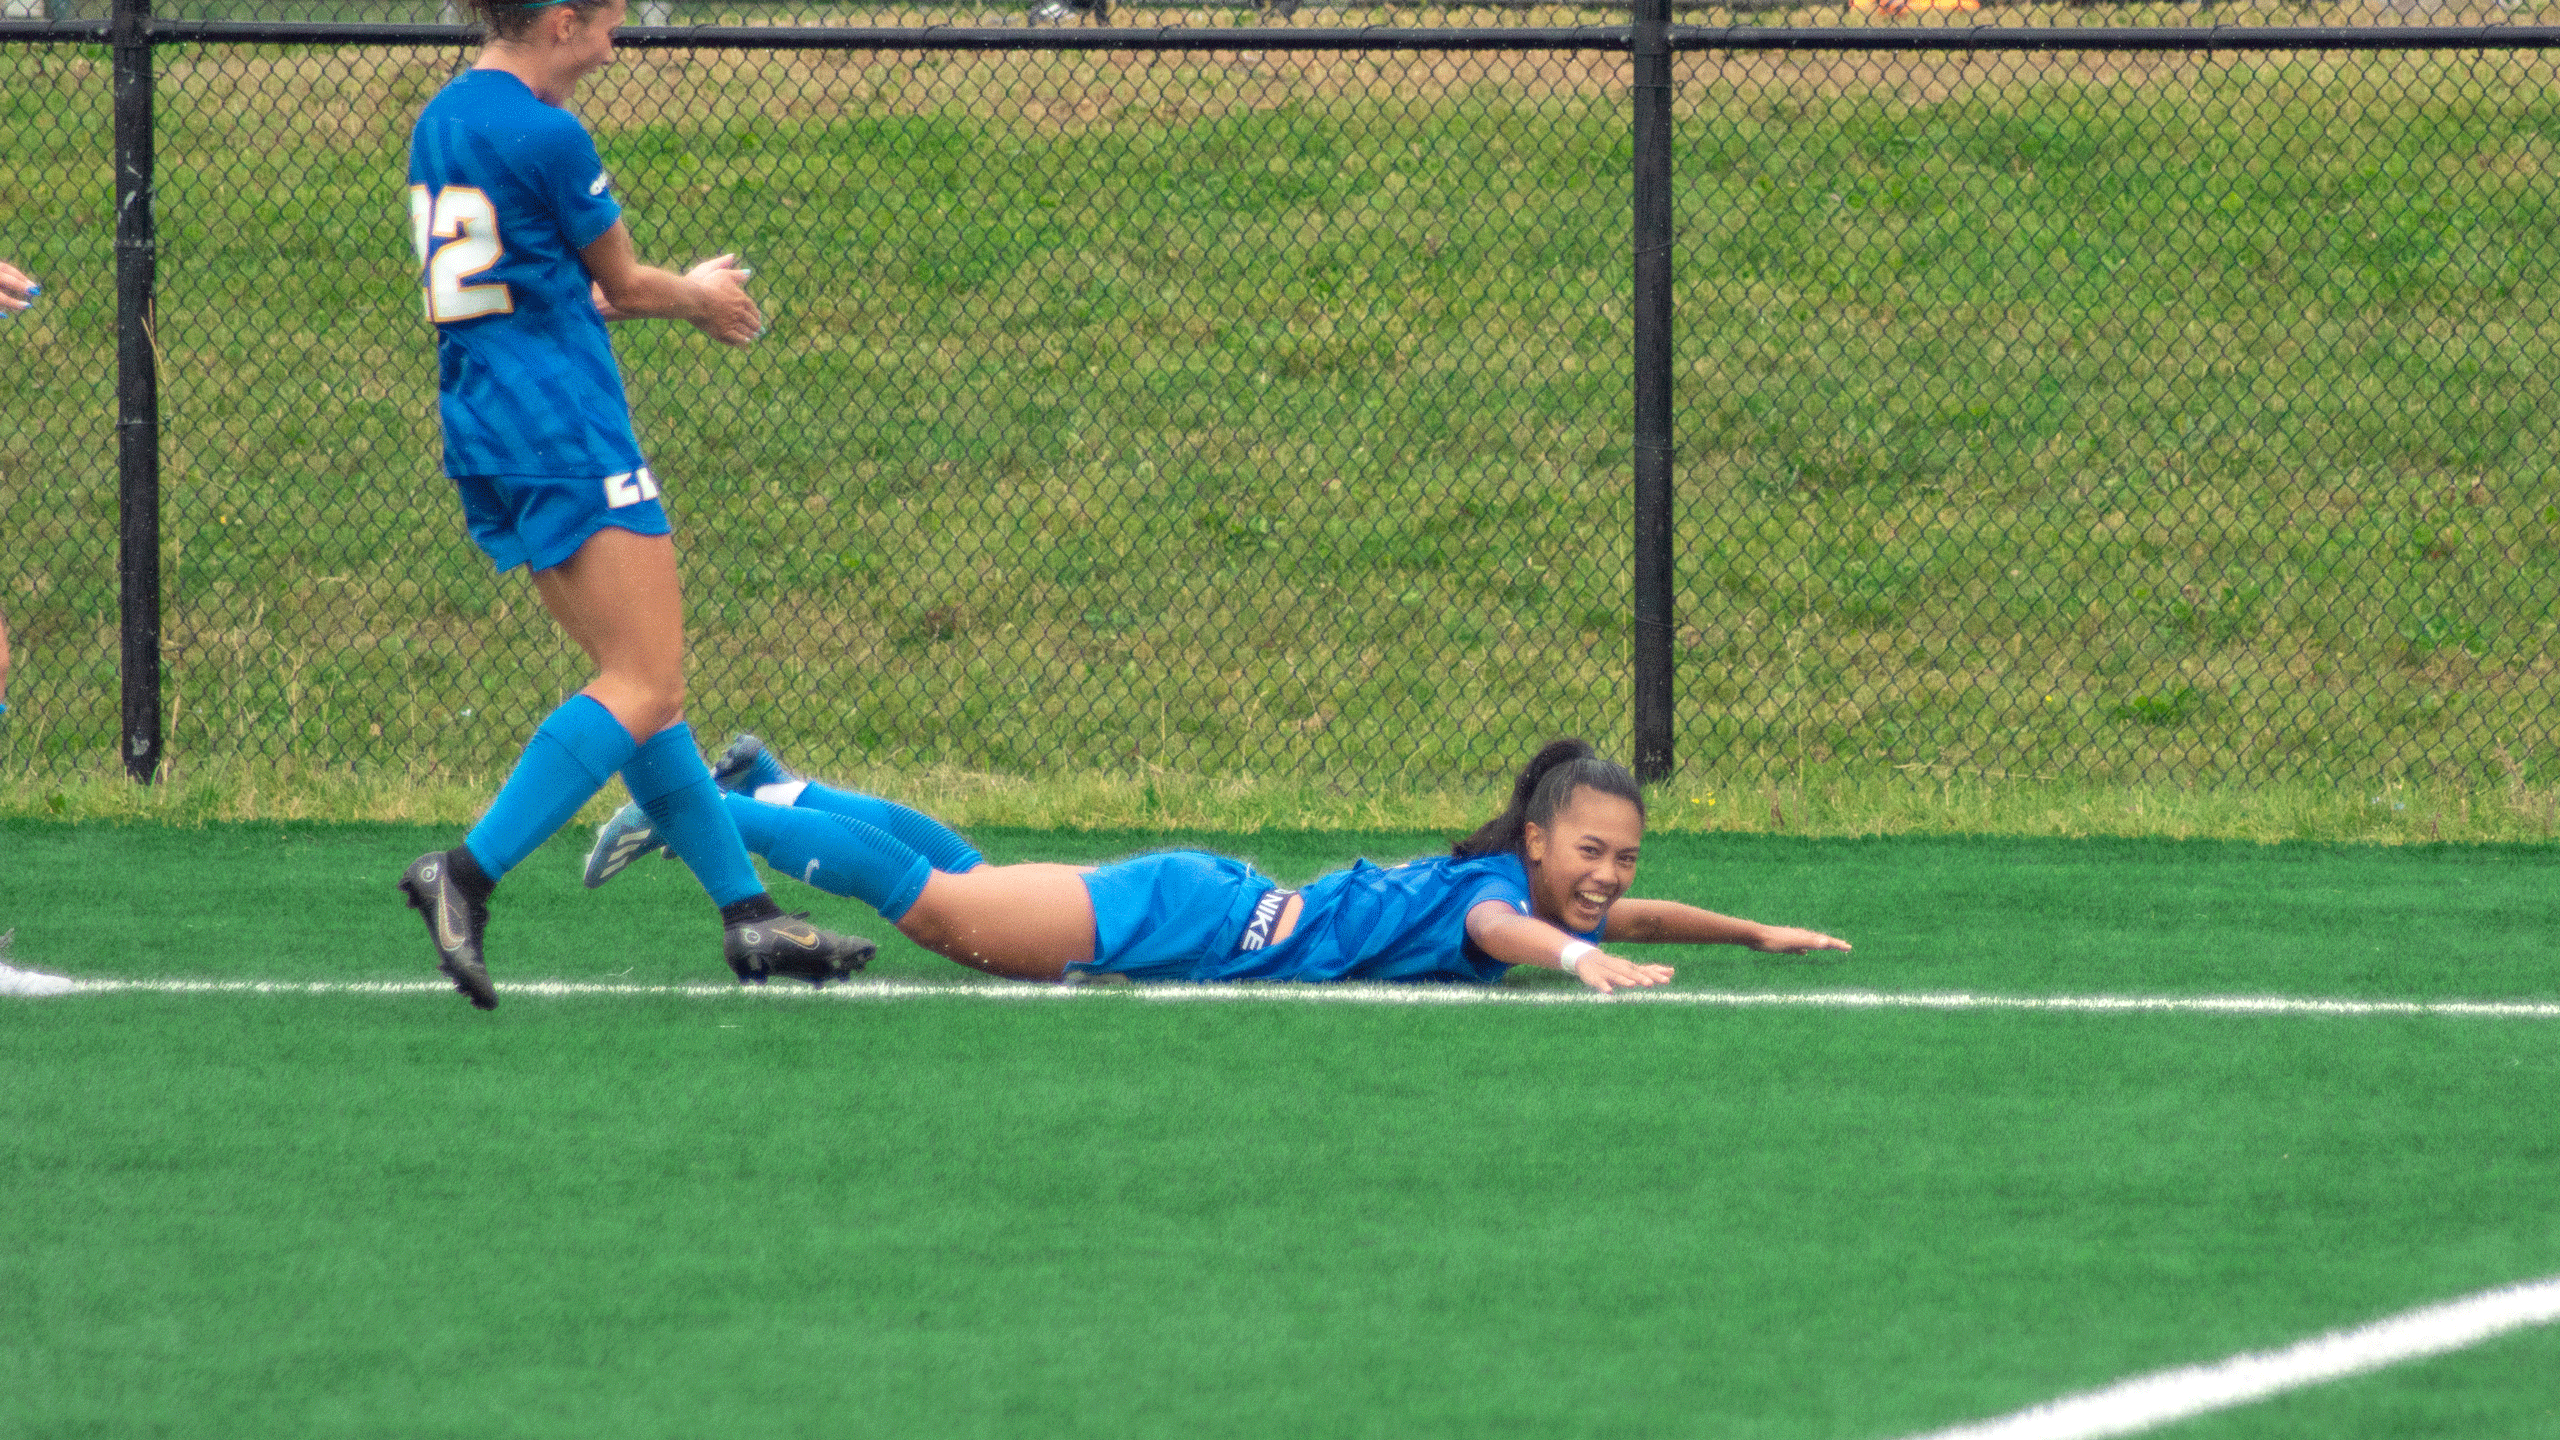 A soccer player in a blue jersey slides across the pitch with a smile on their face